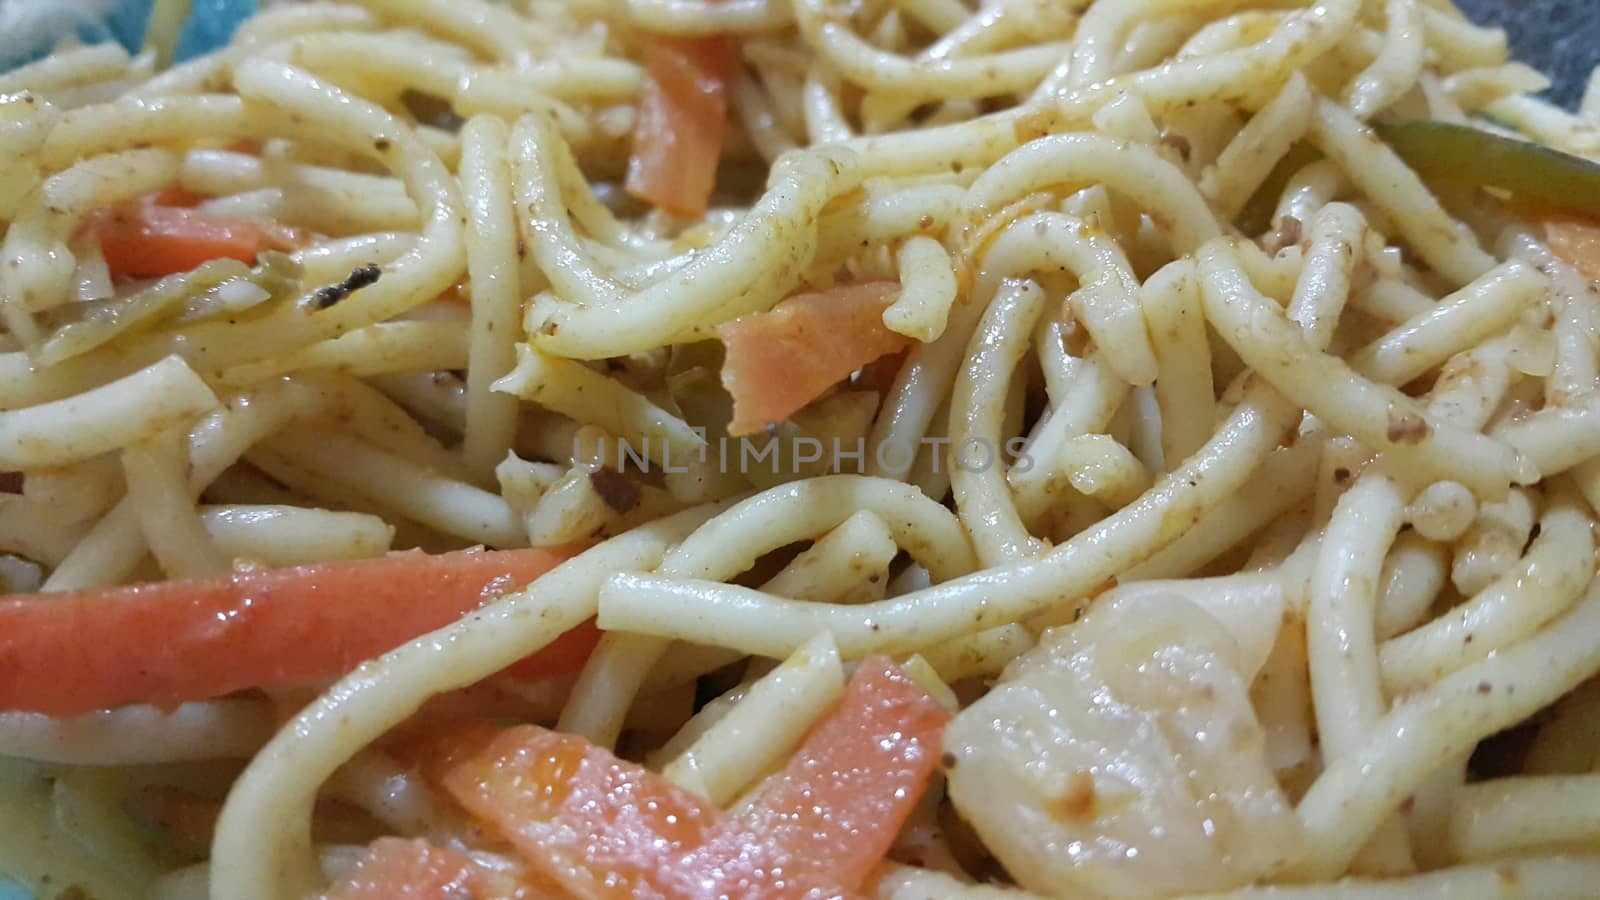 close up view of swirling noodles or spaghetti pasta in a bowl